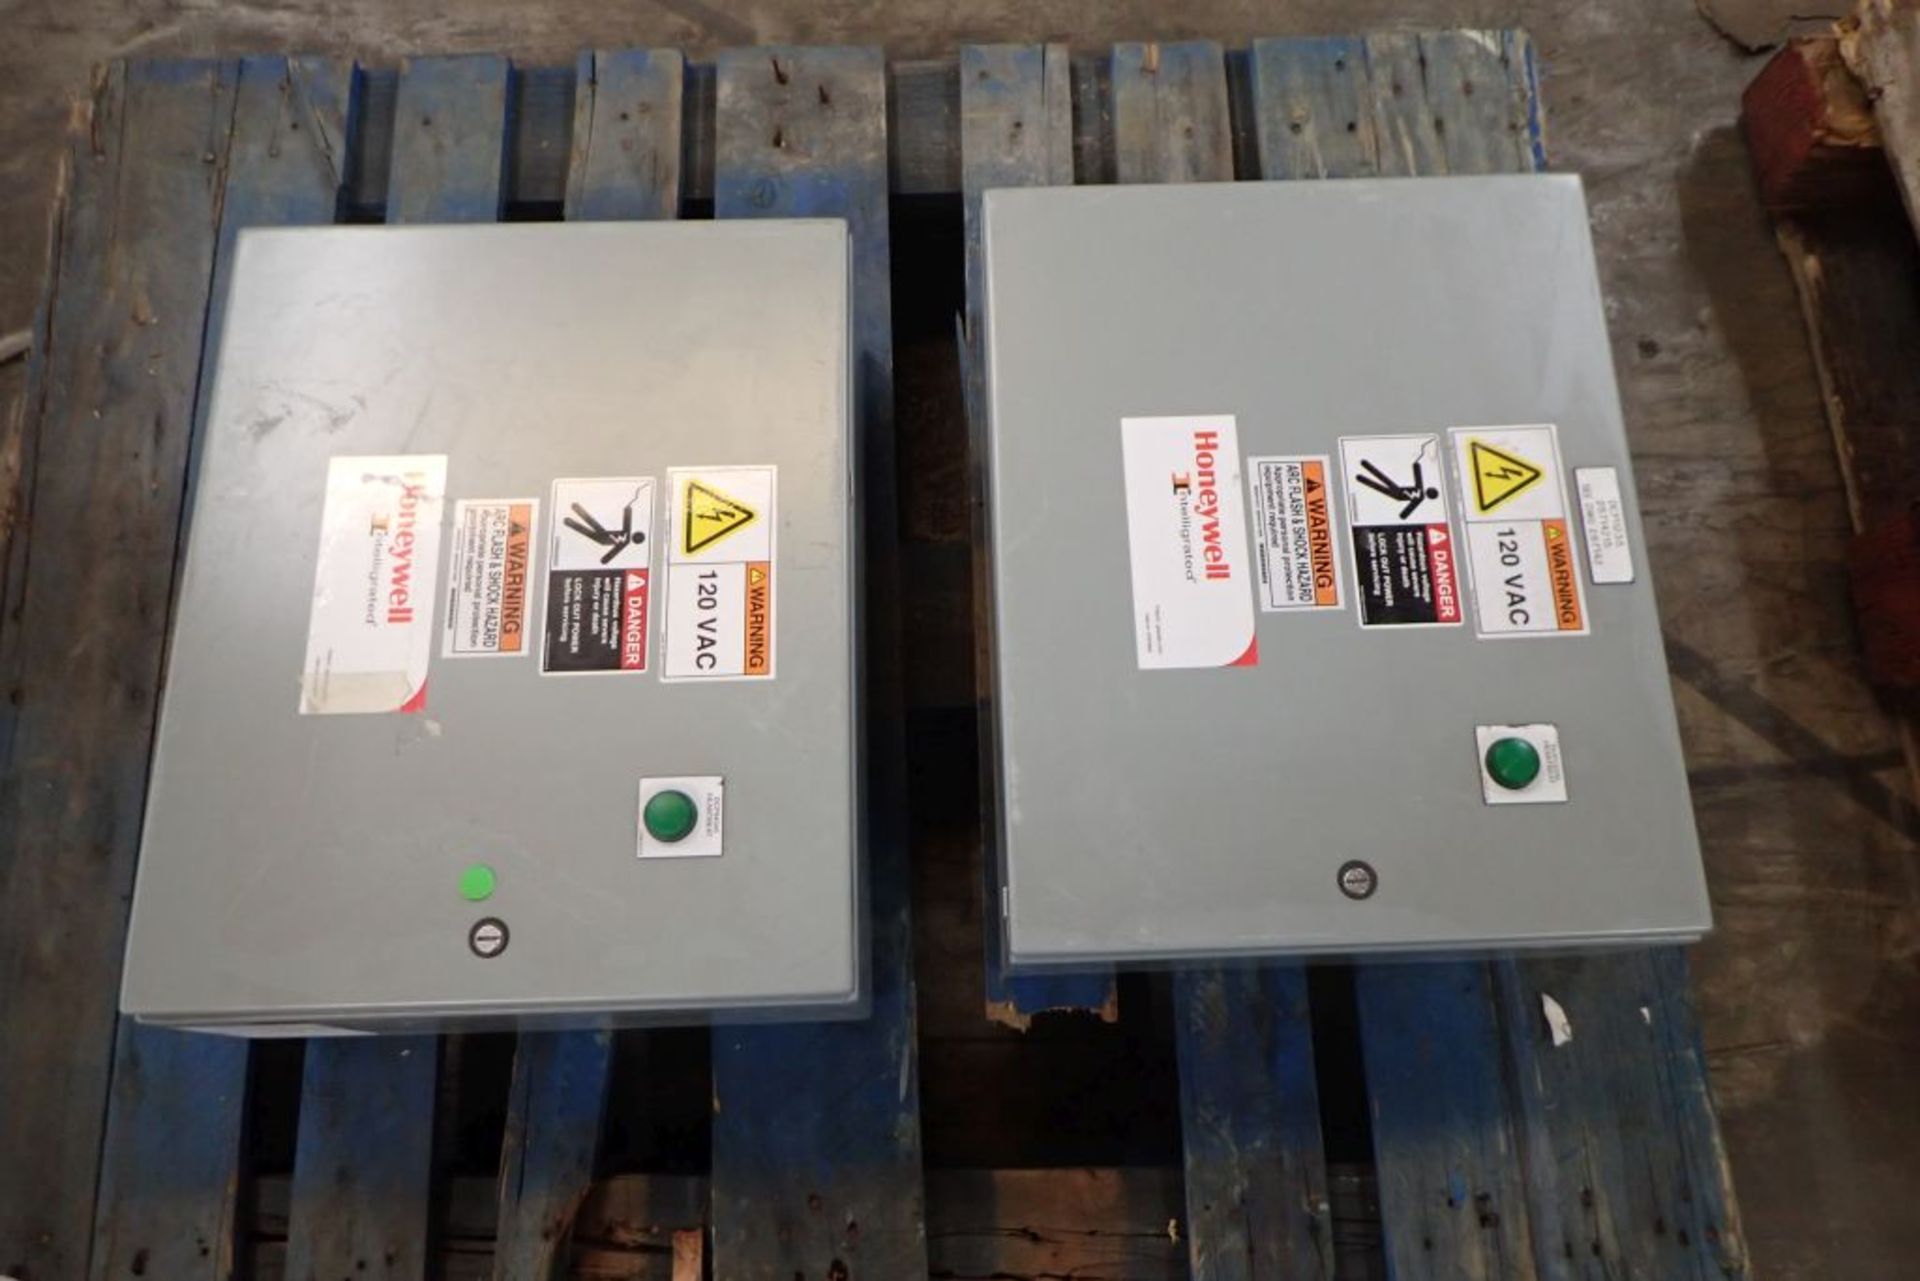 Lot of (2) Hoffman Nvent Industrial Control Panel Enclosures with Contents - Image 2 of 3